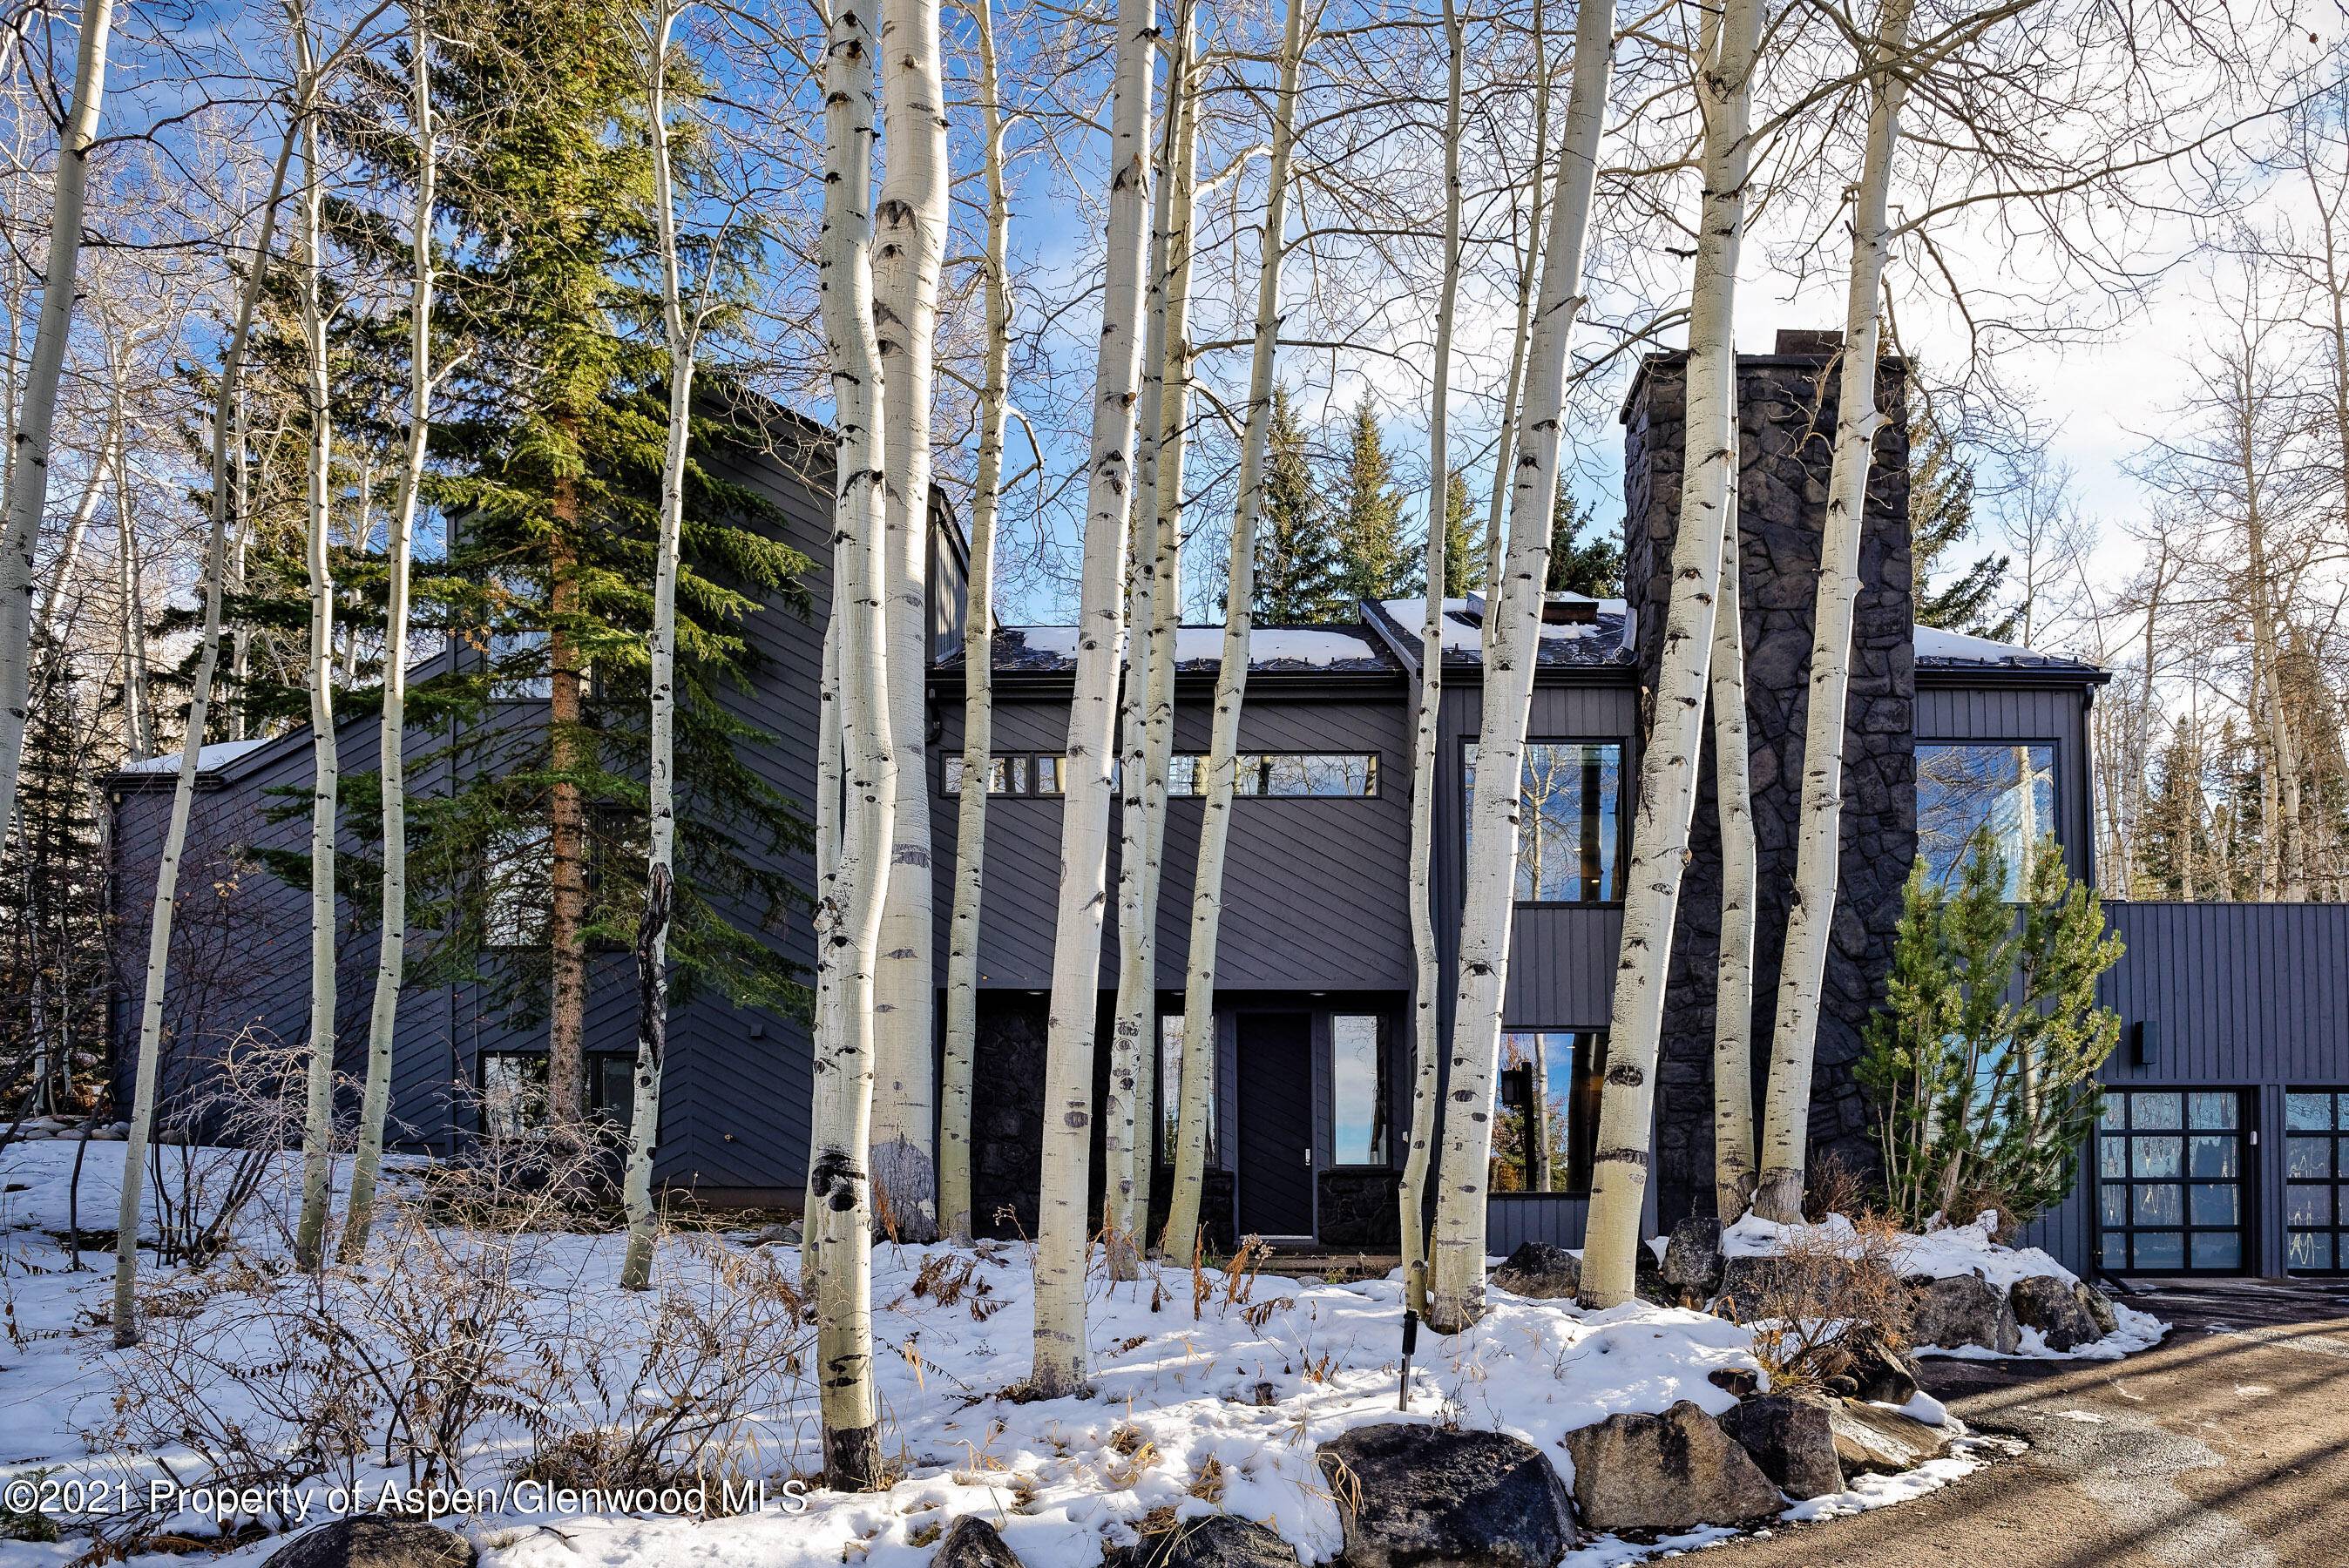 This beautifully remodeled single family home rests on a large lot in one of Snowmass Village's most sought after neighborhoods.